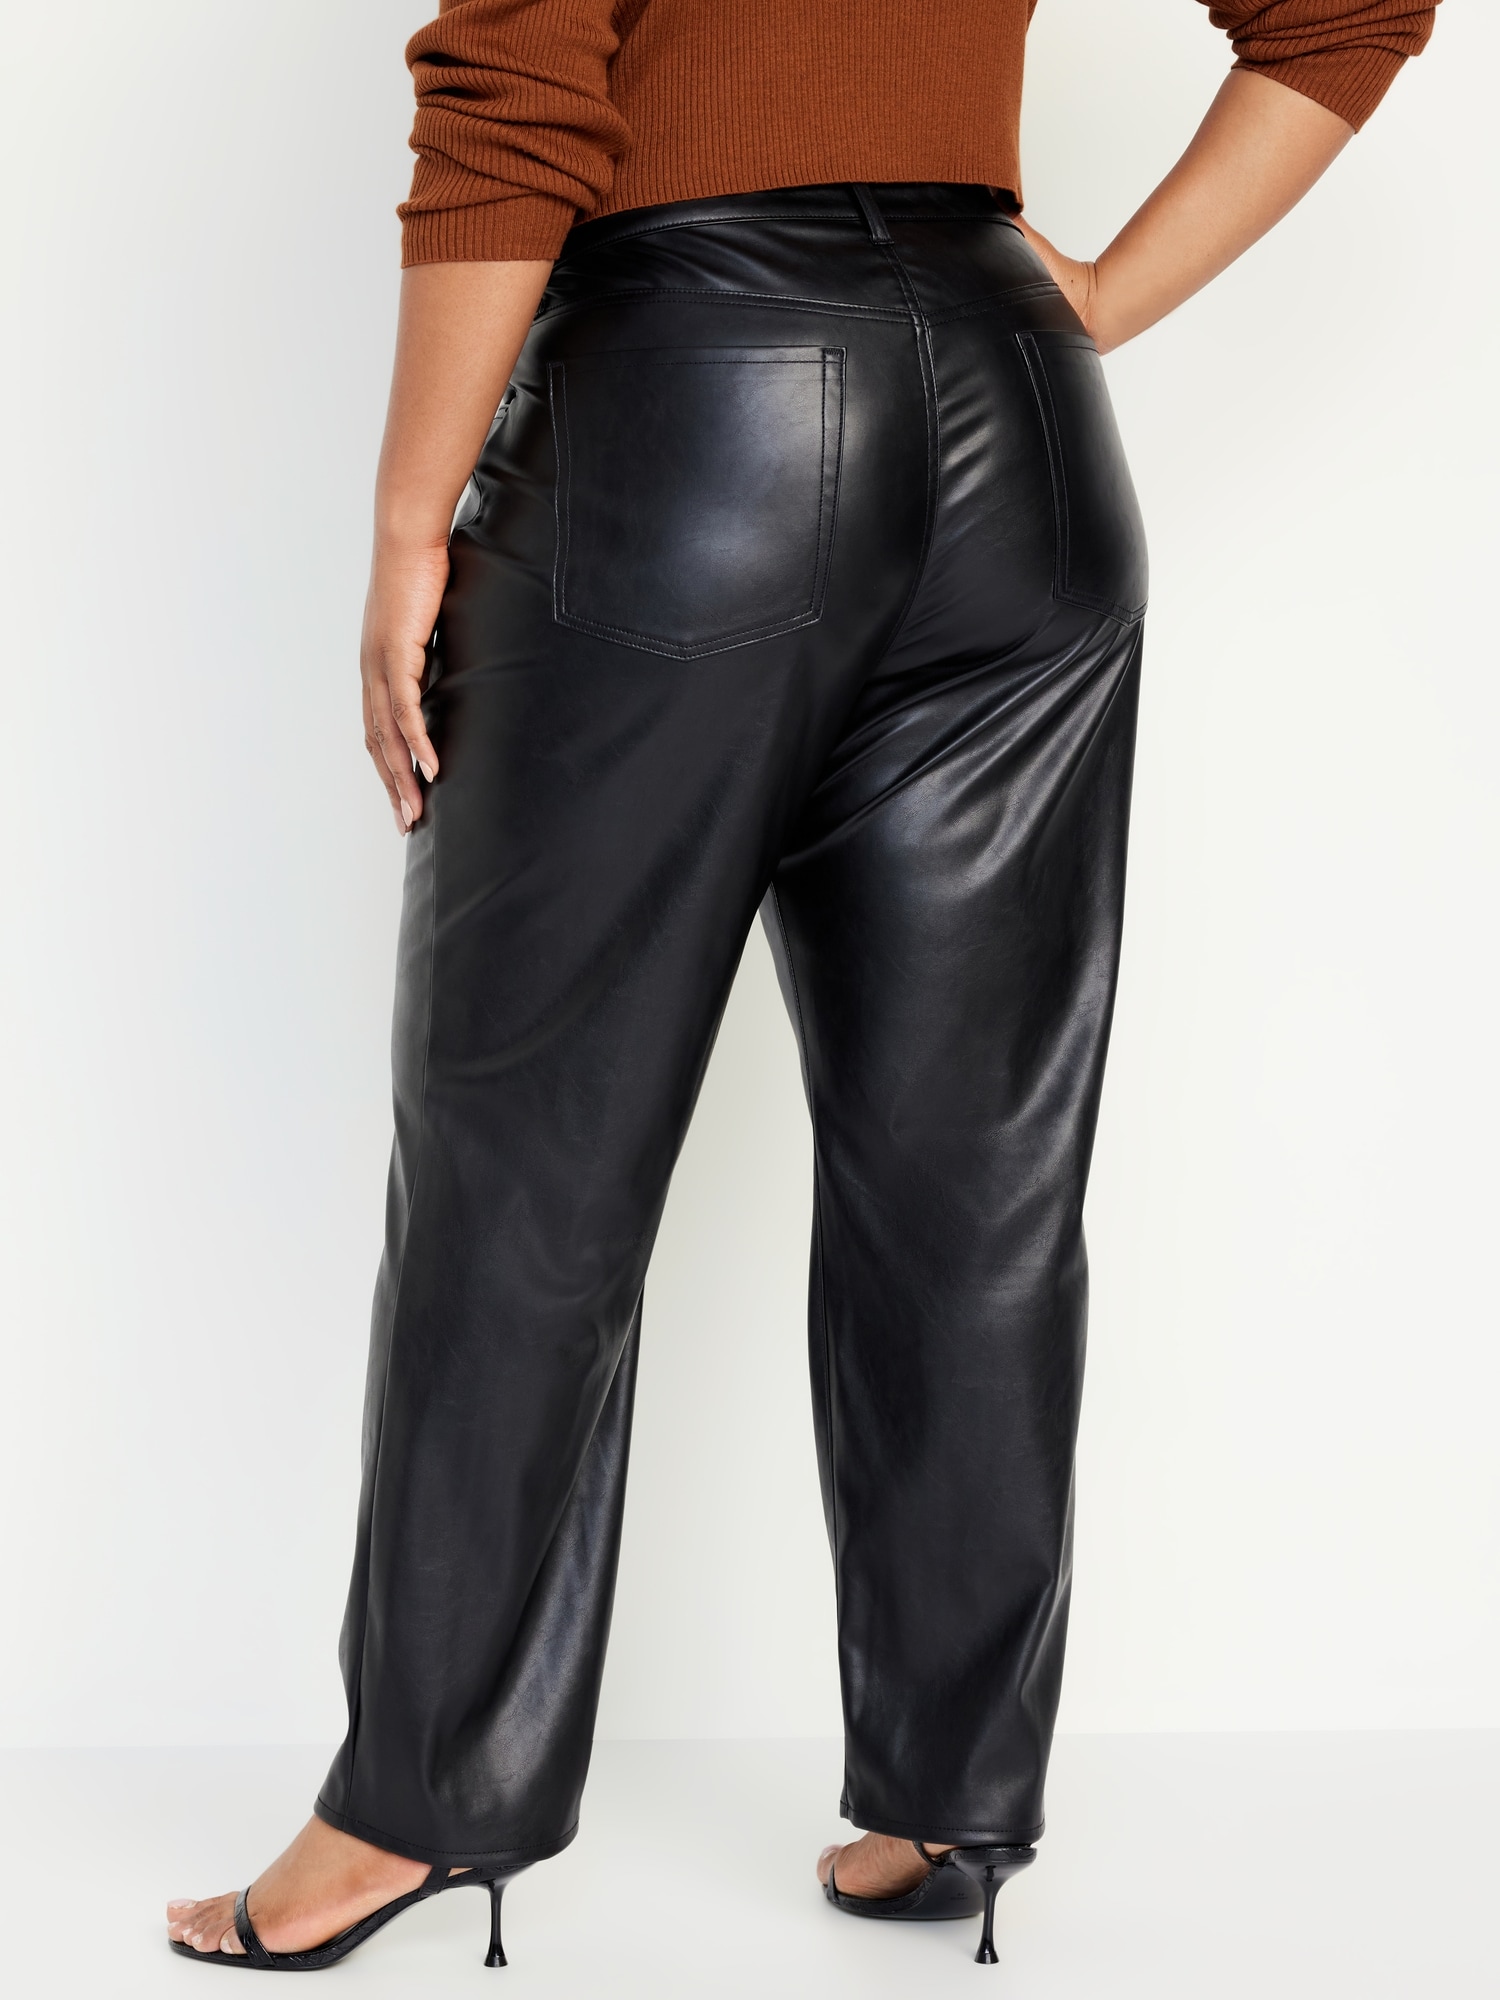 High Waist Leather Pants • Factory Price • FREE Shipping – © FashionPlay